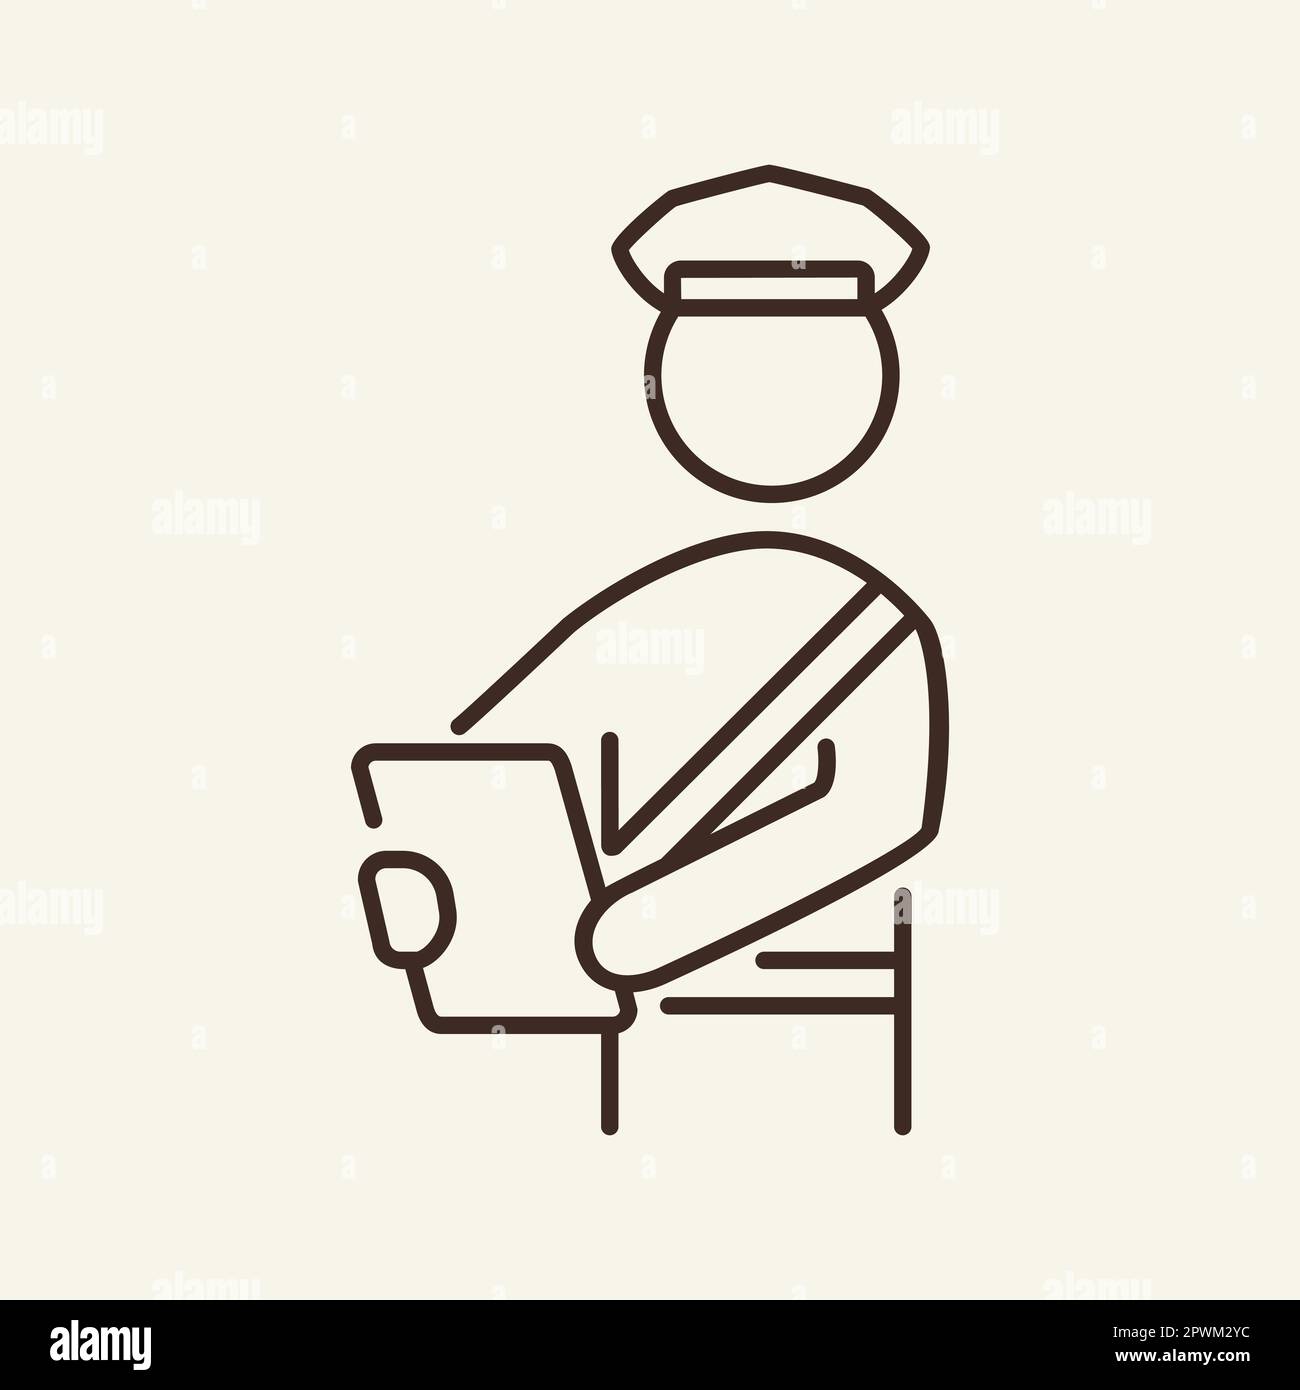 Document inspection line icon Stock Vector